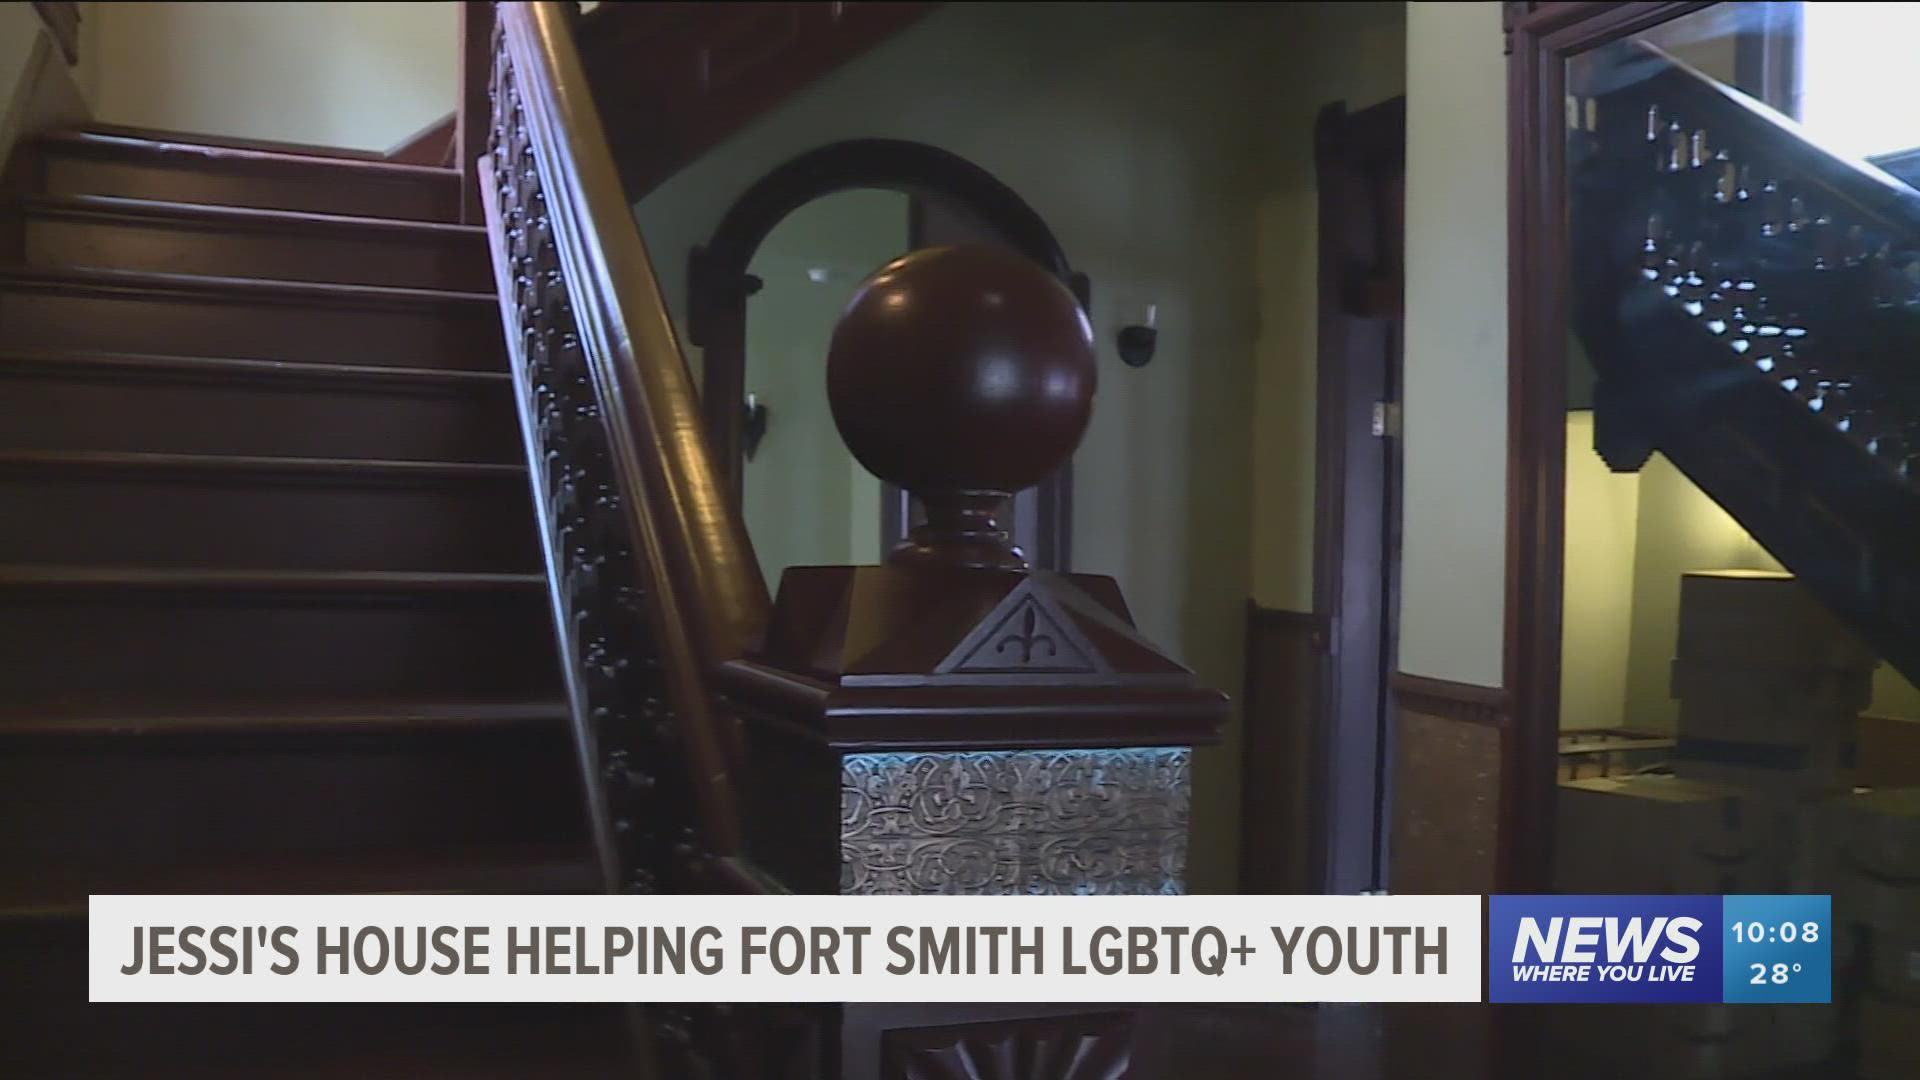 Applications begin Feb. 1 for LGBTQ members to move into Jessi’s House in Fort Smith on March 1.